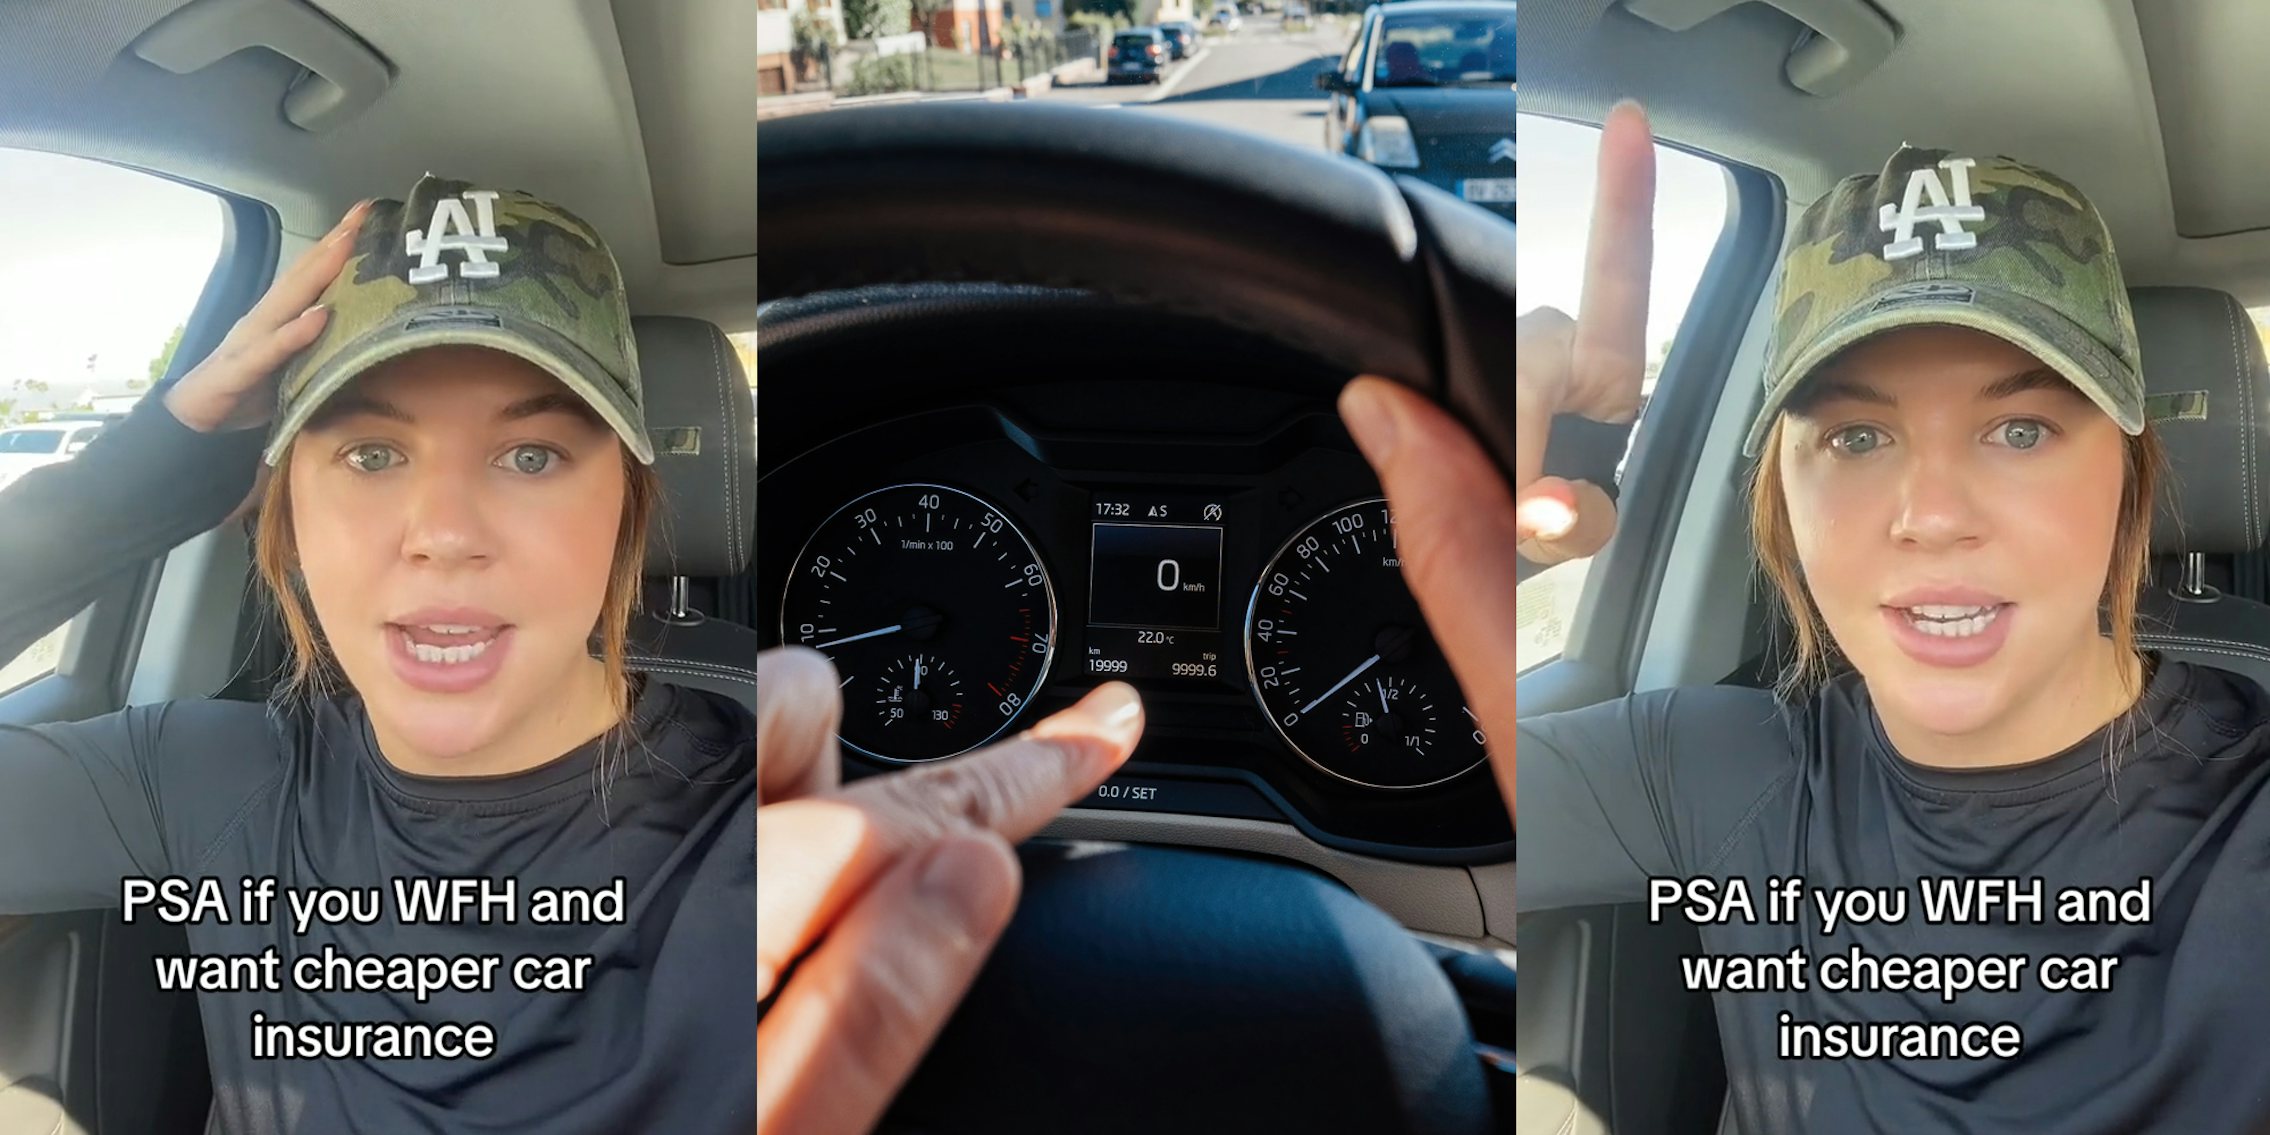 wfh worker in car speaking with caption 'PSA if you WFH and want cheaper car insurance' (l) woman in driver seat pointing to milage on car display (c) wfh worker in car speaking with caption 'PSA if you WFH and want cheaper car insurance' (r)